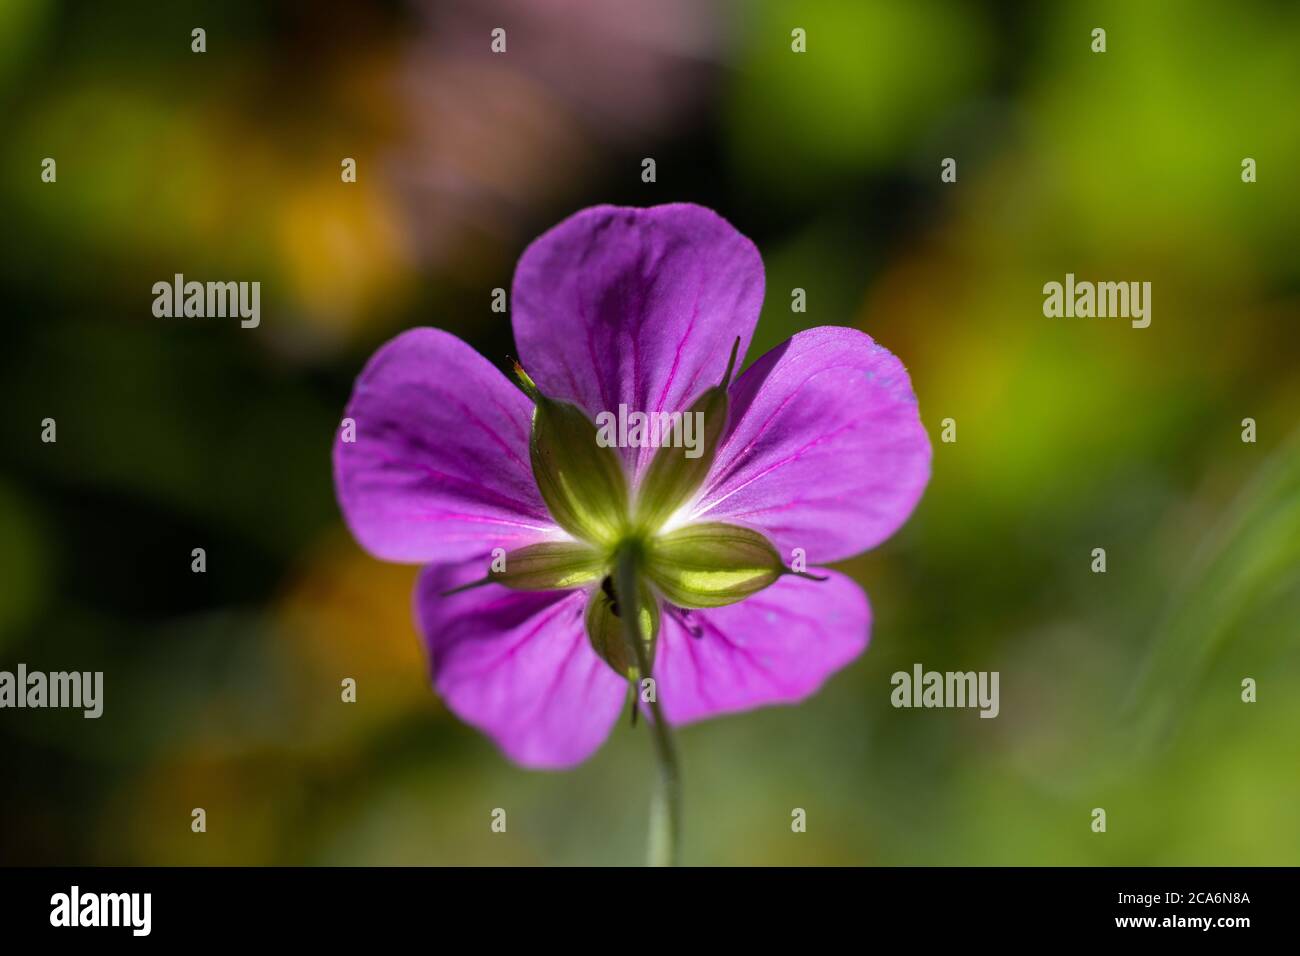 Perennial geranium, from the back of the flower. Stock Photo